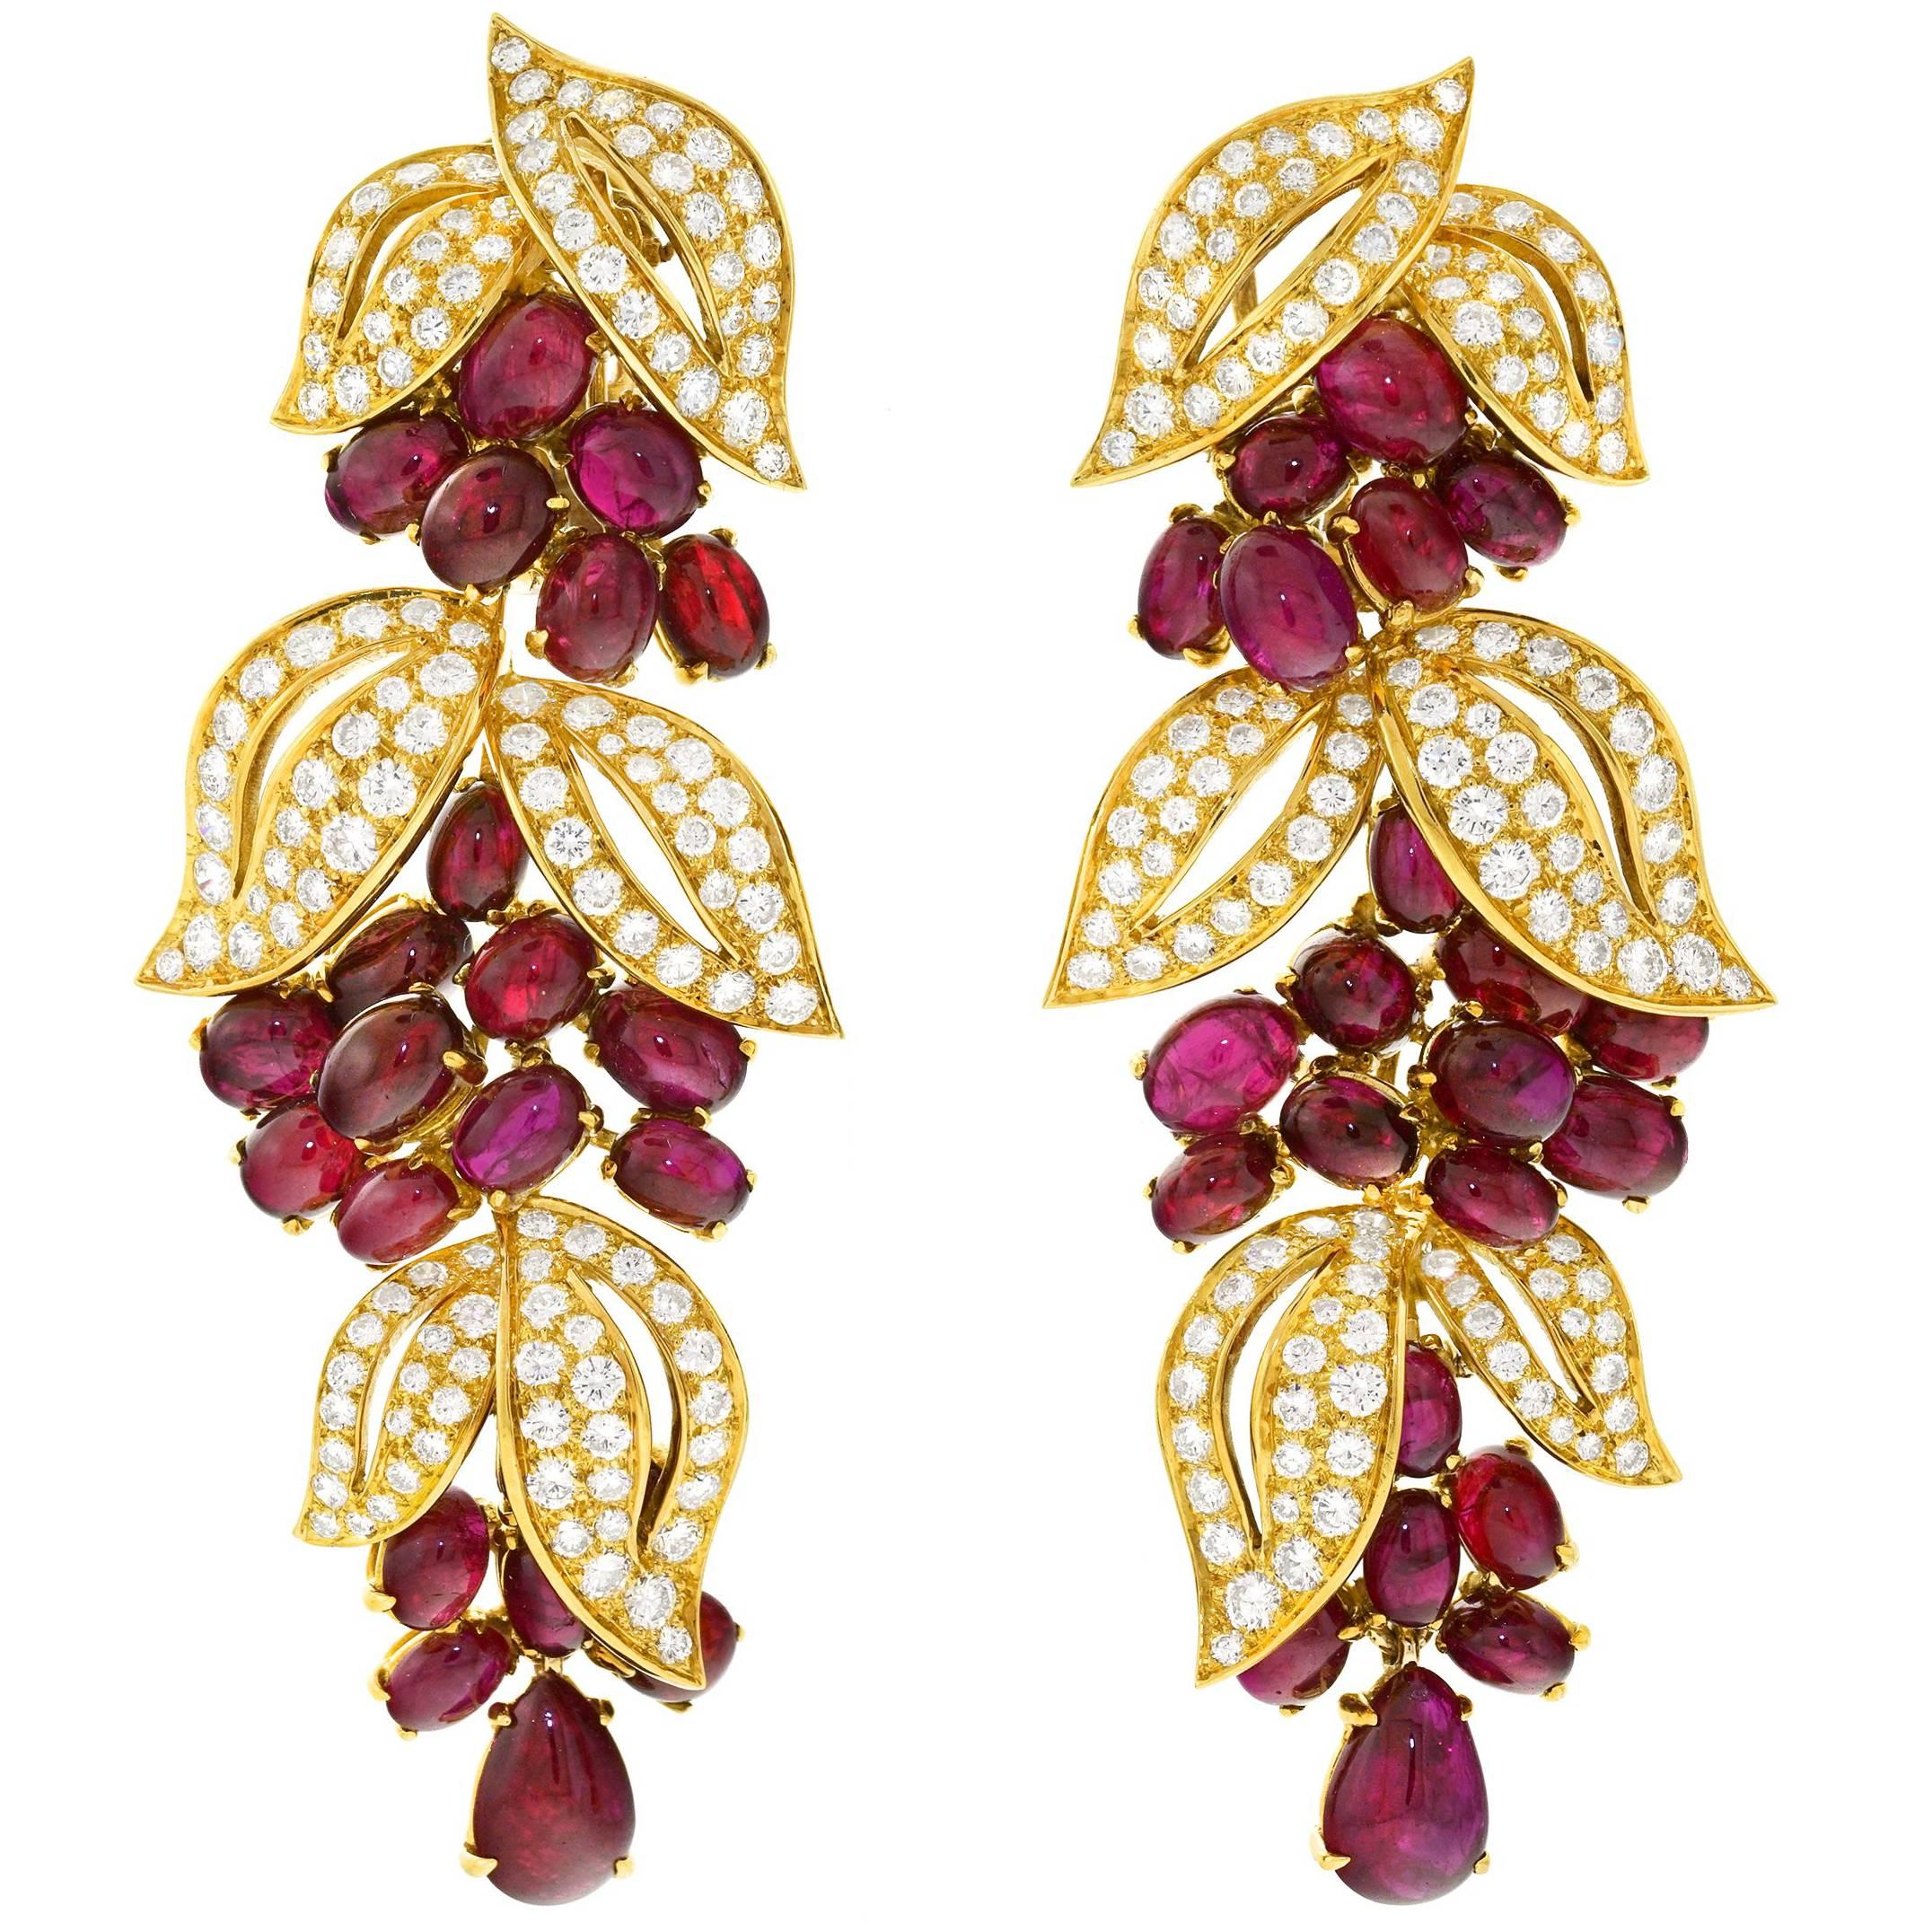 Spectacular Adler No Heat Ruby and Diamond Set Gold Earrings